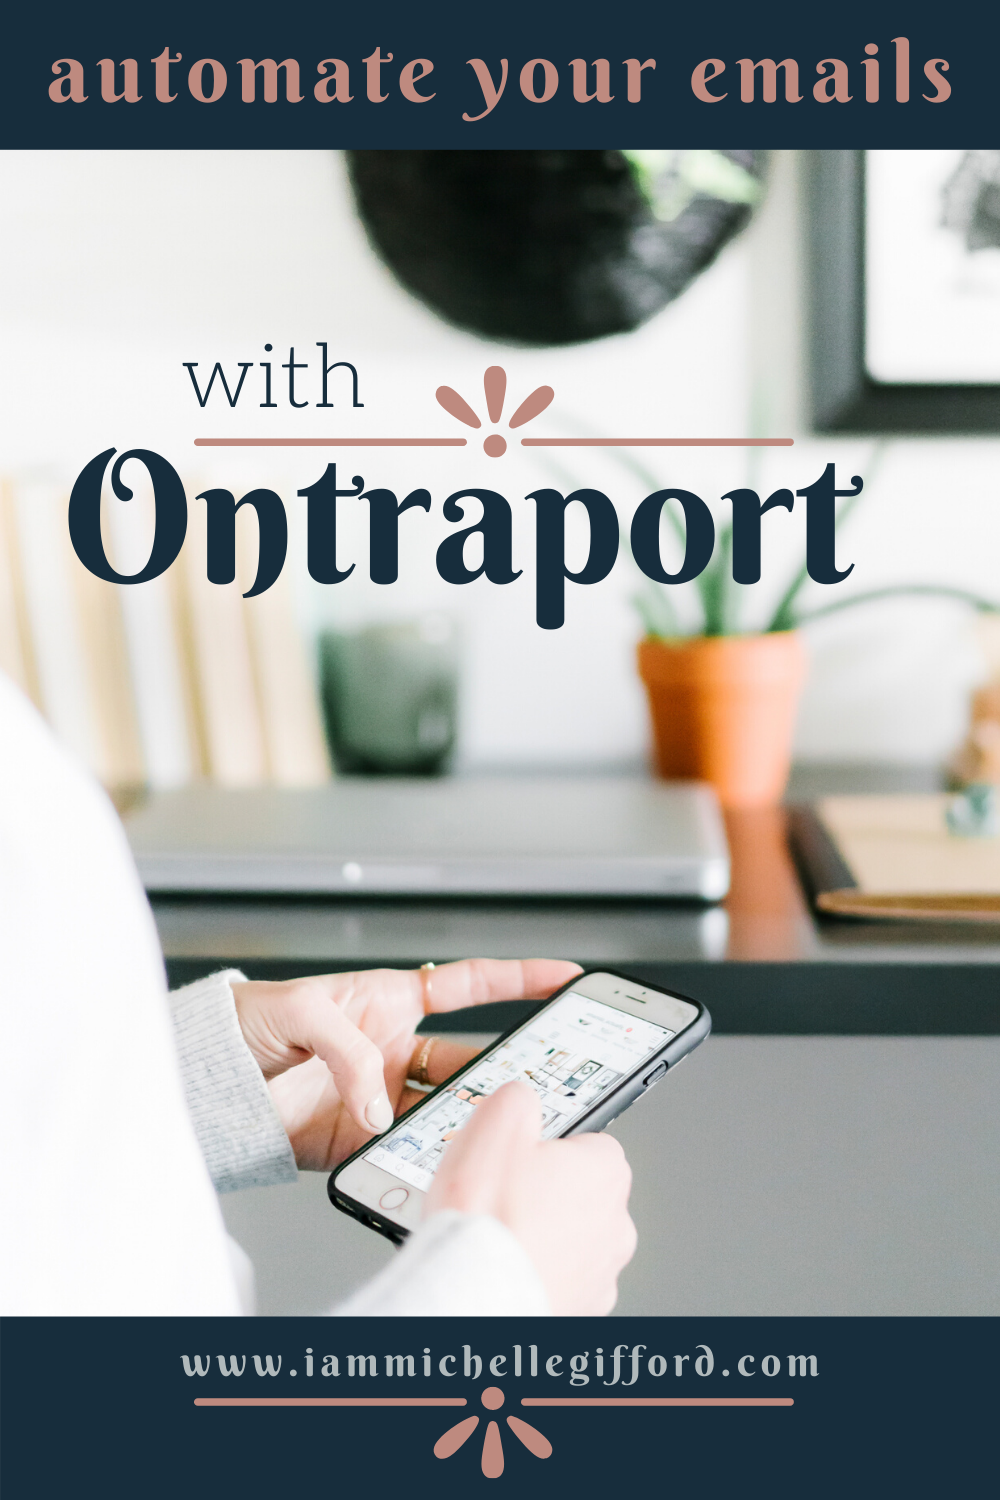 Using Ontraport to Automate my Email Marketing- www.iammichellegifford.com